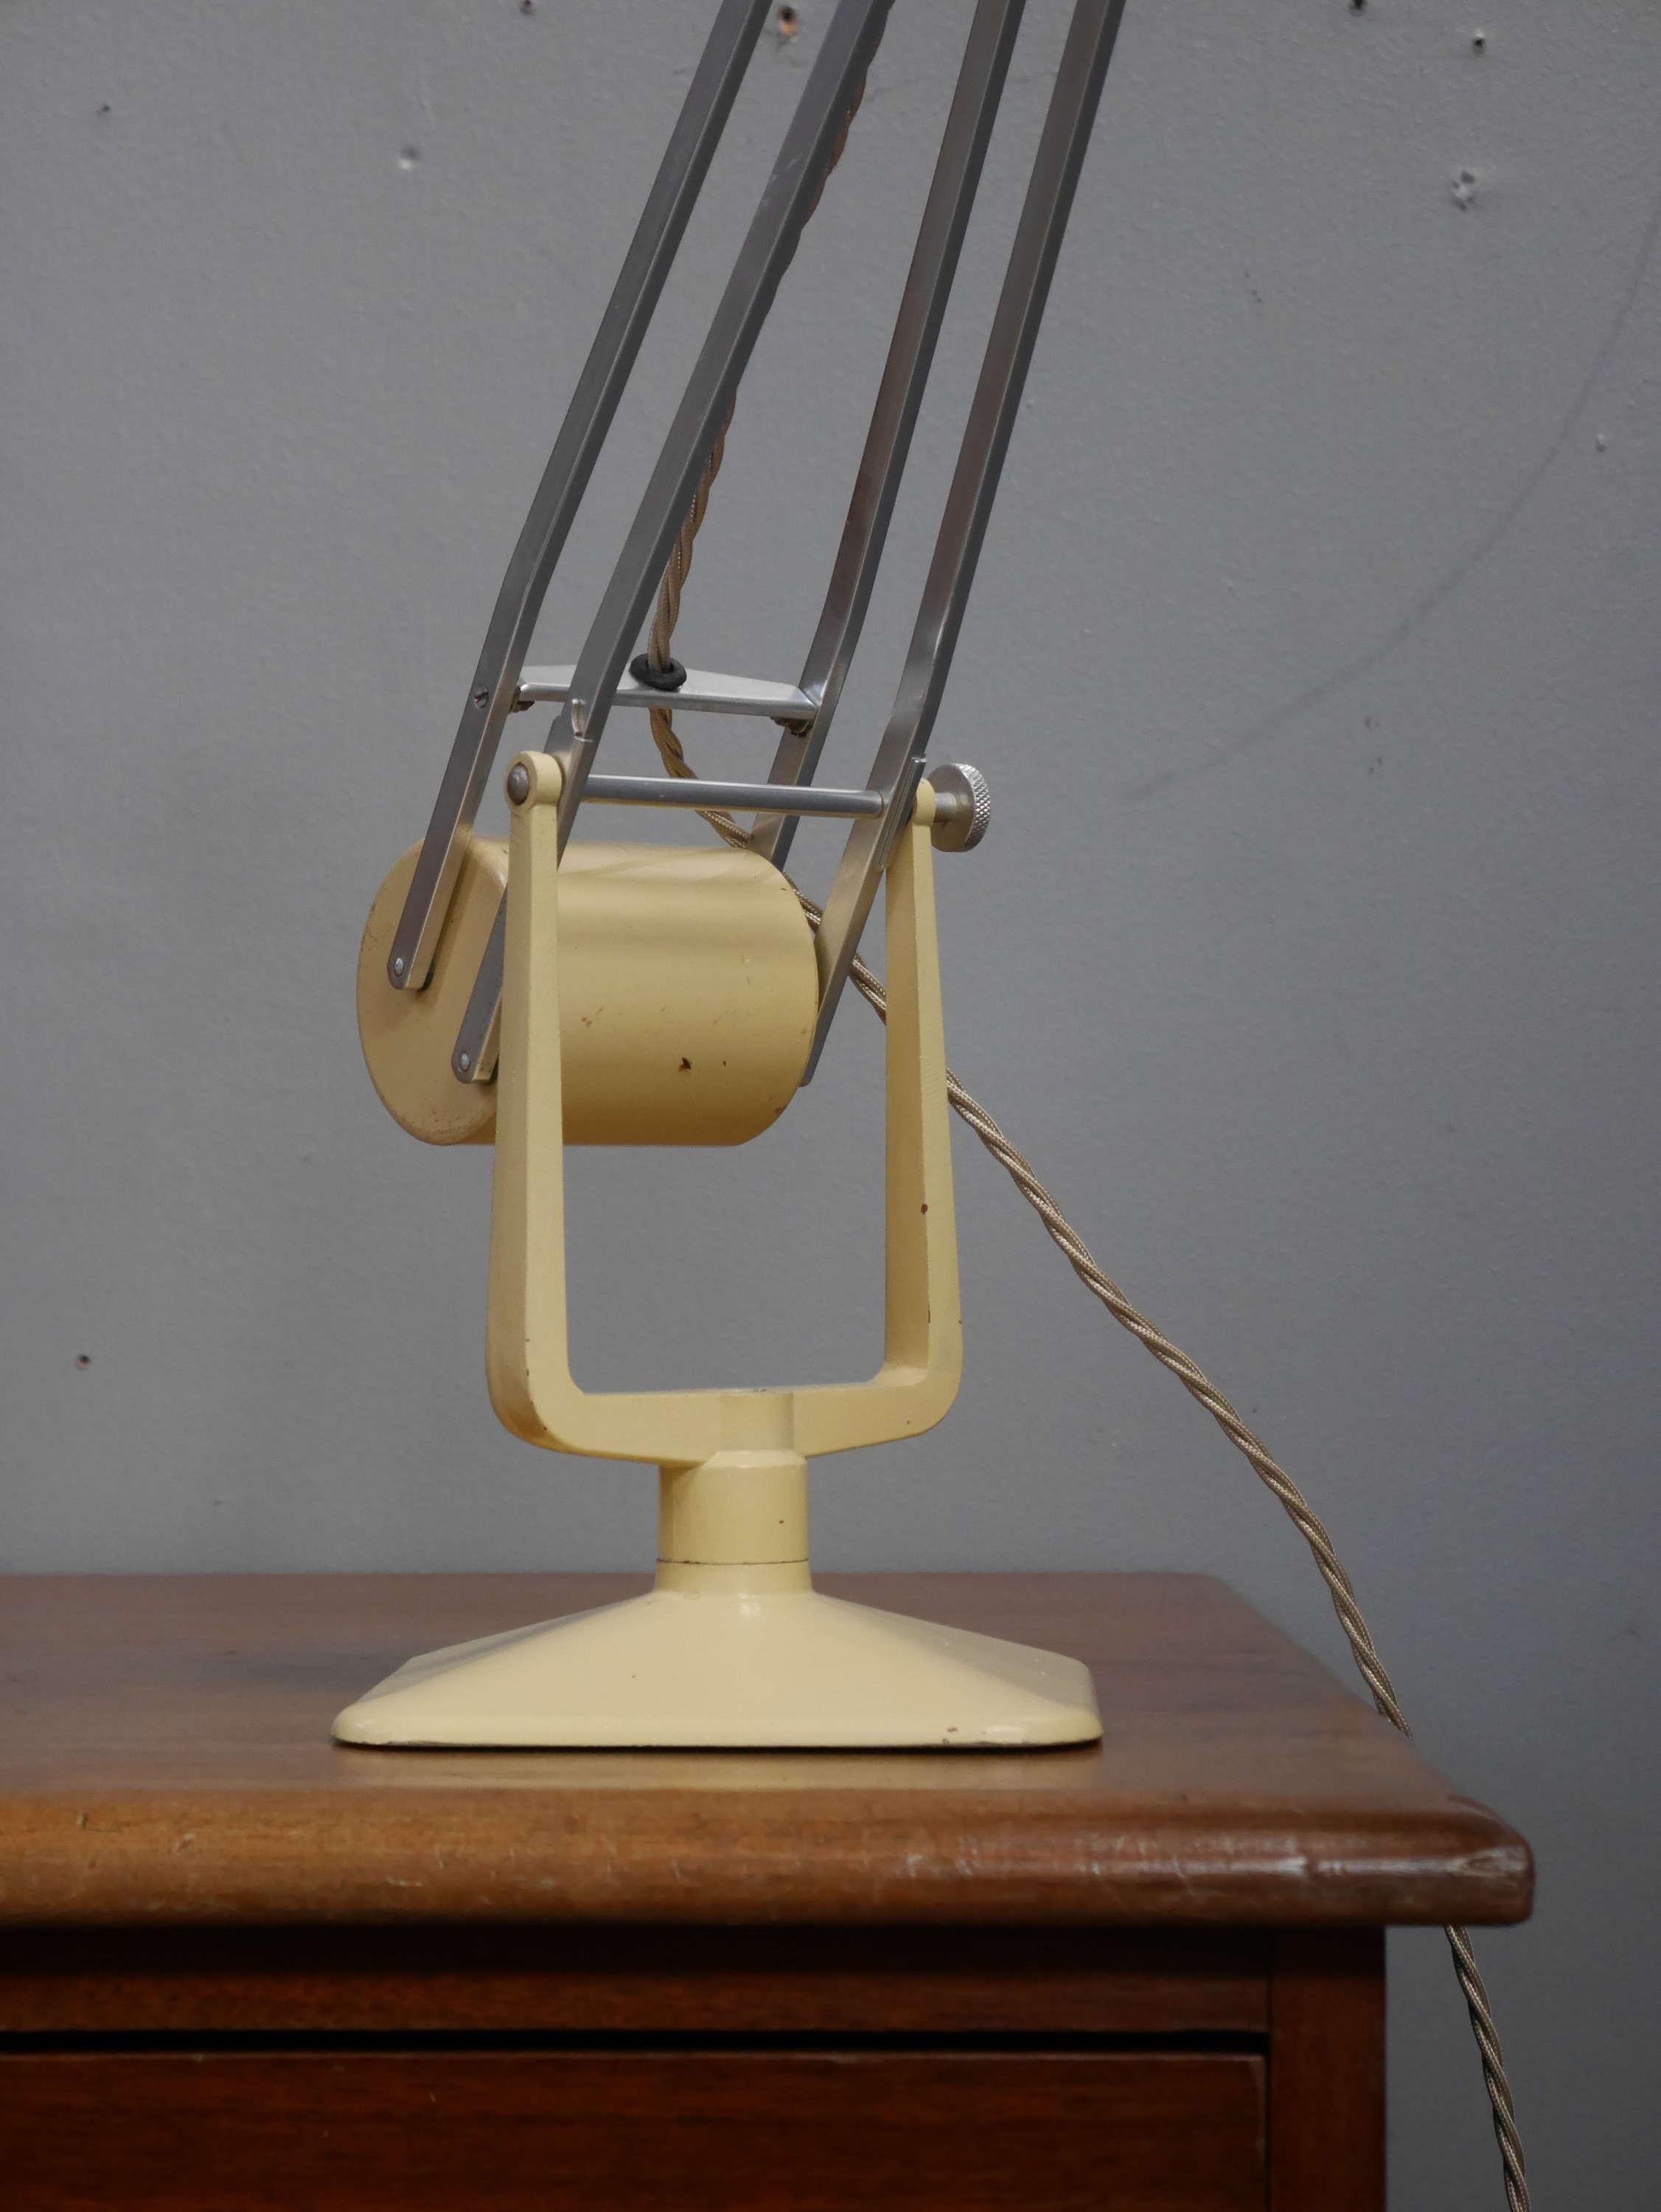 An original vintage Hadrill Horstmann counterbalance desk lamp.
An industrial design classic featuring a heavy cast iron counterbalance, original factory paintwork to the base, counterweight & shade and polished aluminium arms.
An excellent